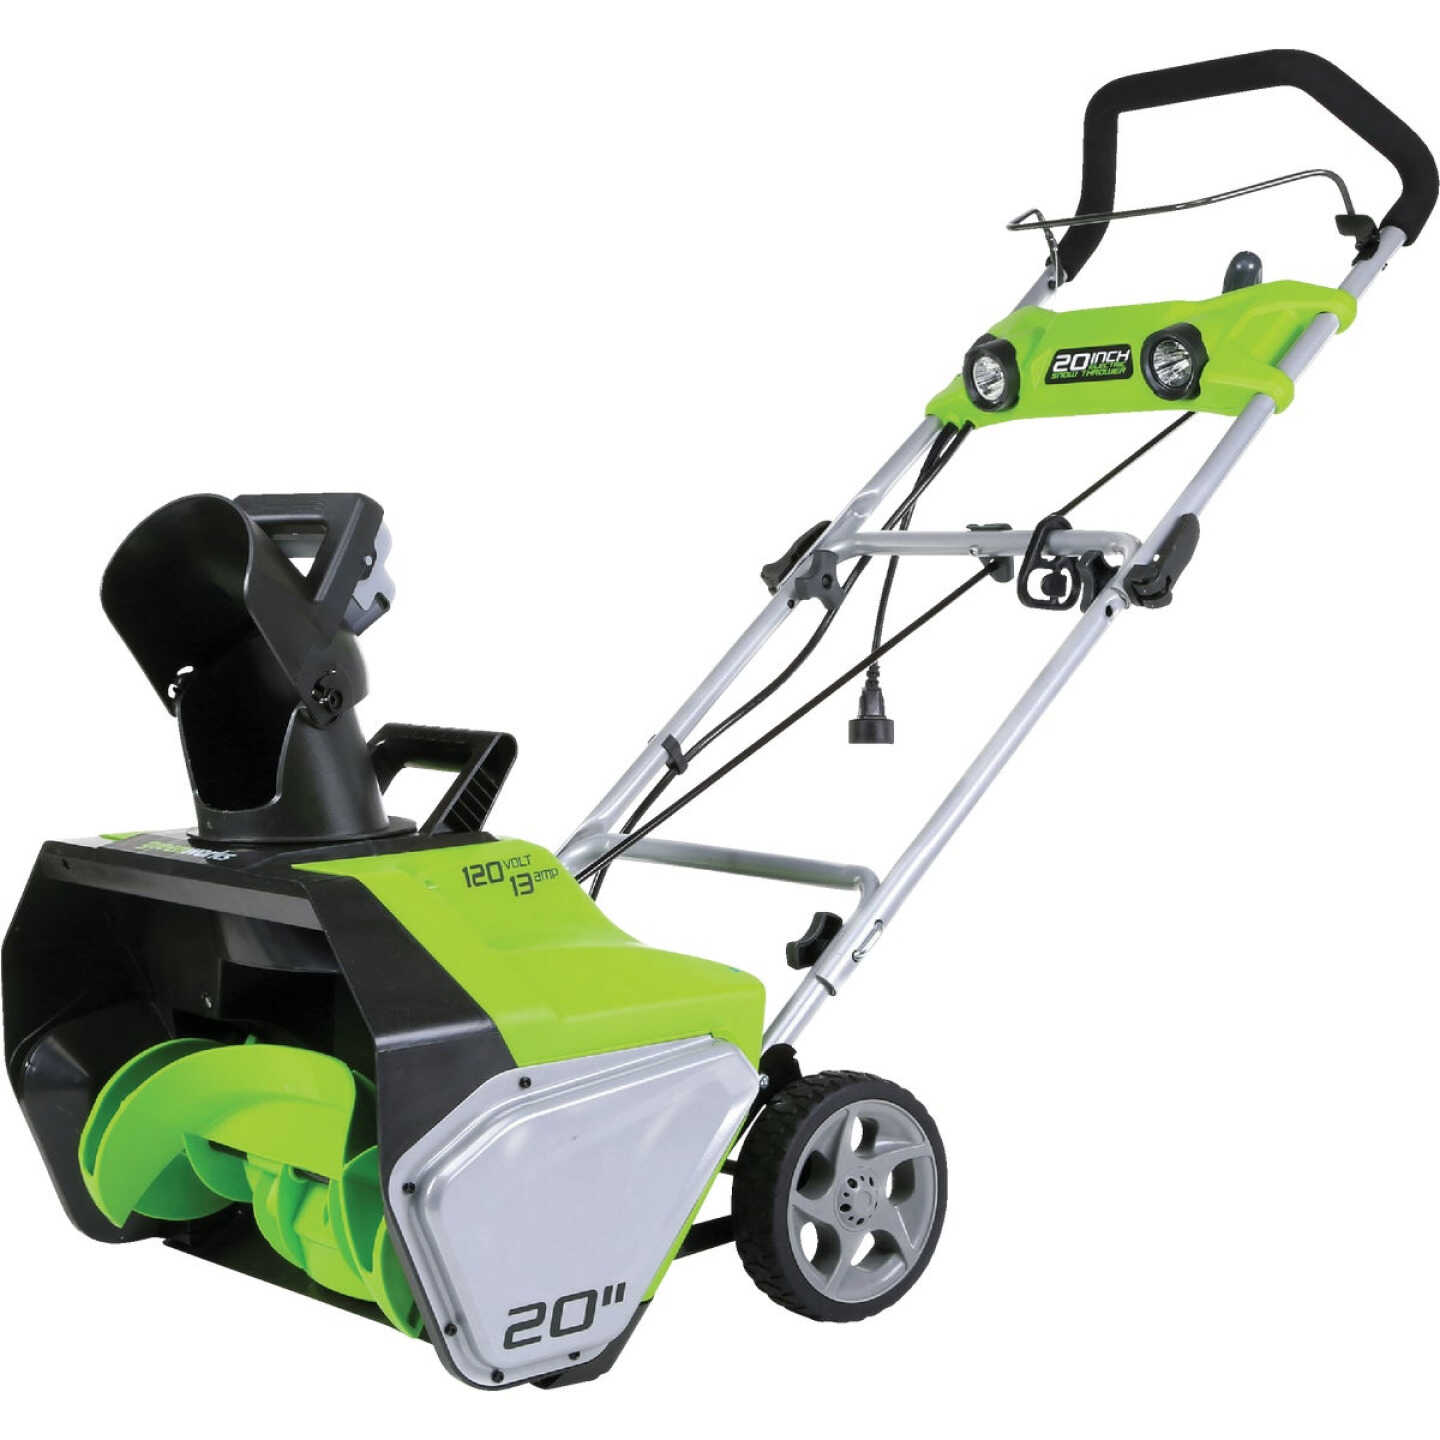 You are currently viewing 3 Advantages Electric Snow Blowers Have Over Gas Snow Blowers